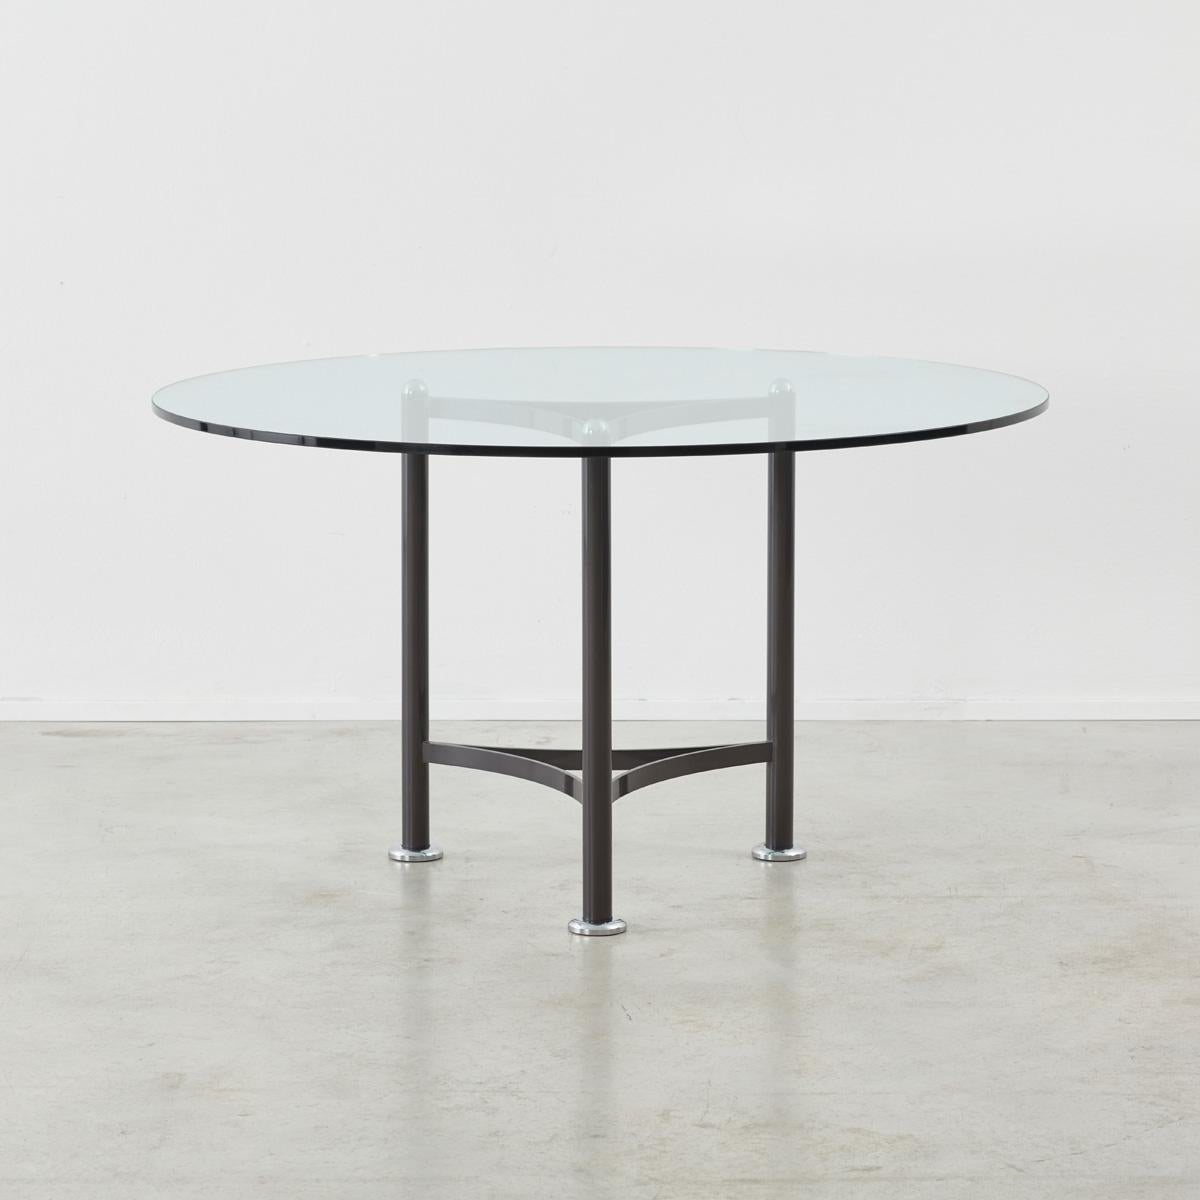 Luigi Caccia Dominioni was a Milanese architect and a leading pioneer in industrial design. He made this round table for his own company (Azucena) in 1970 and it typifies the brand’s principles of formal elegance and an aesthetic purity. Its glass